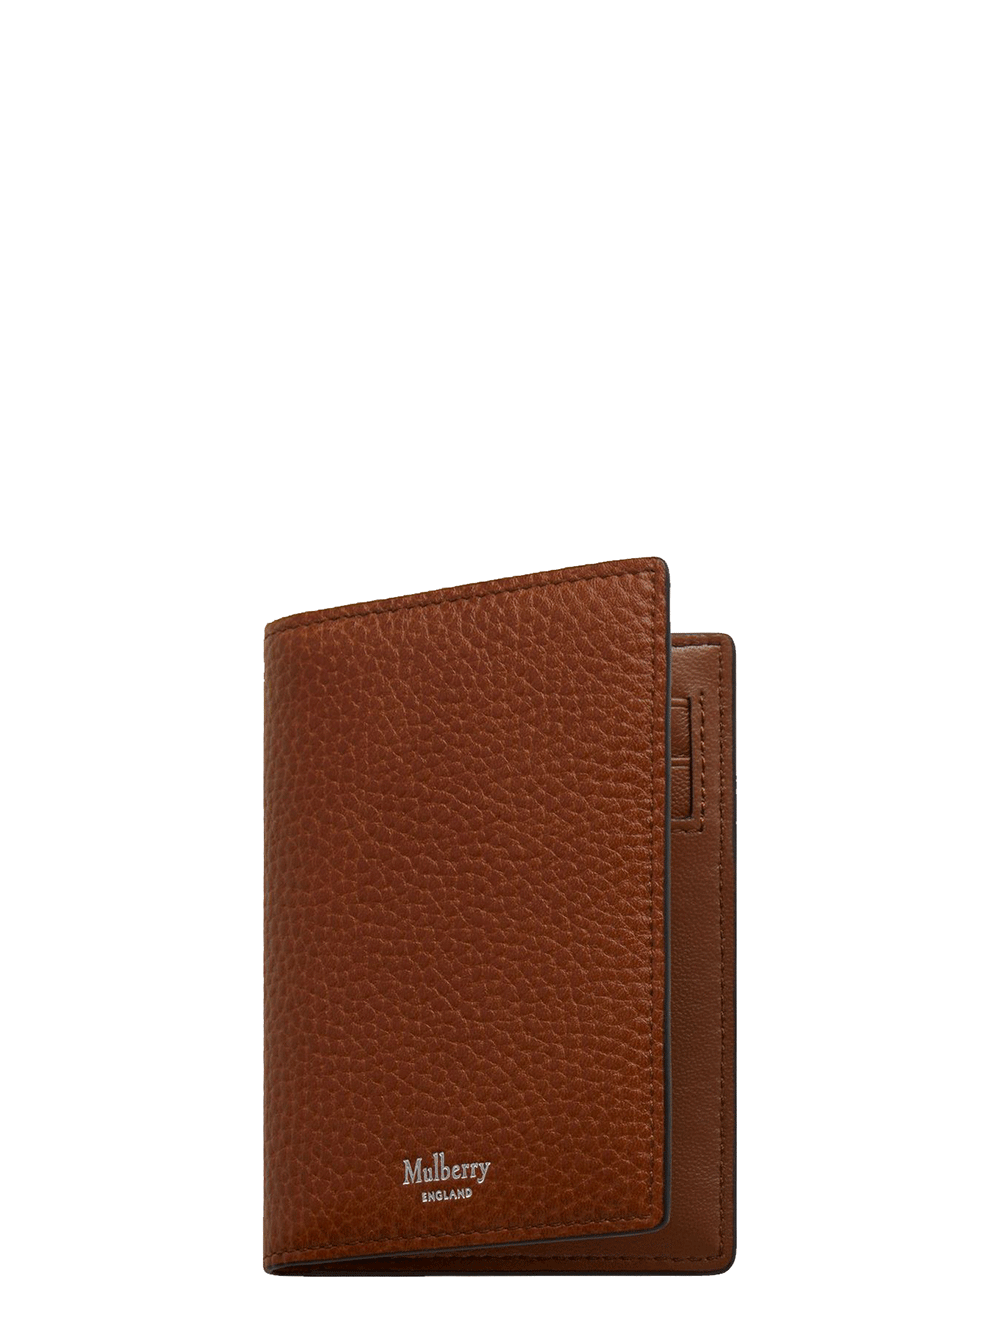 Mulberry-Card-Wallet-Two-Tone-Scg-Brown-1